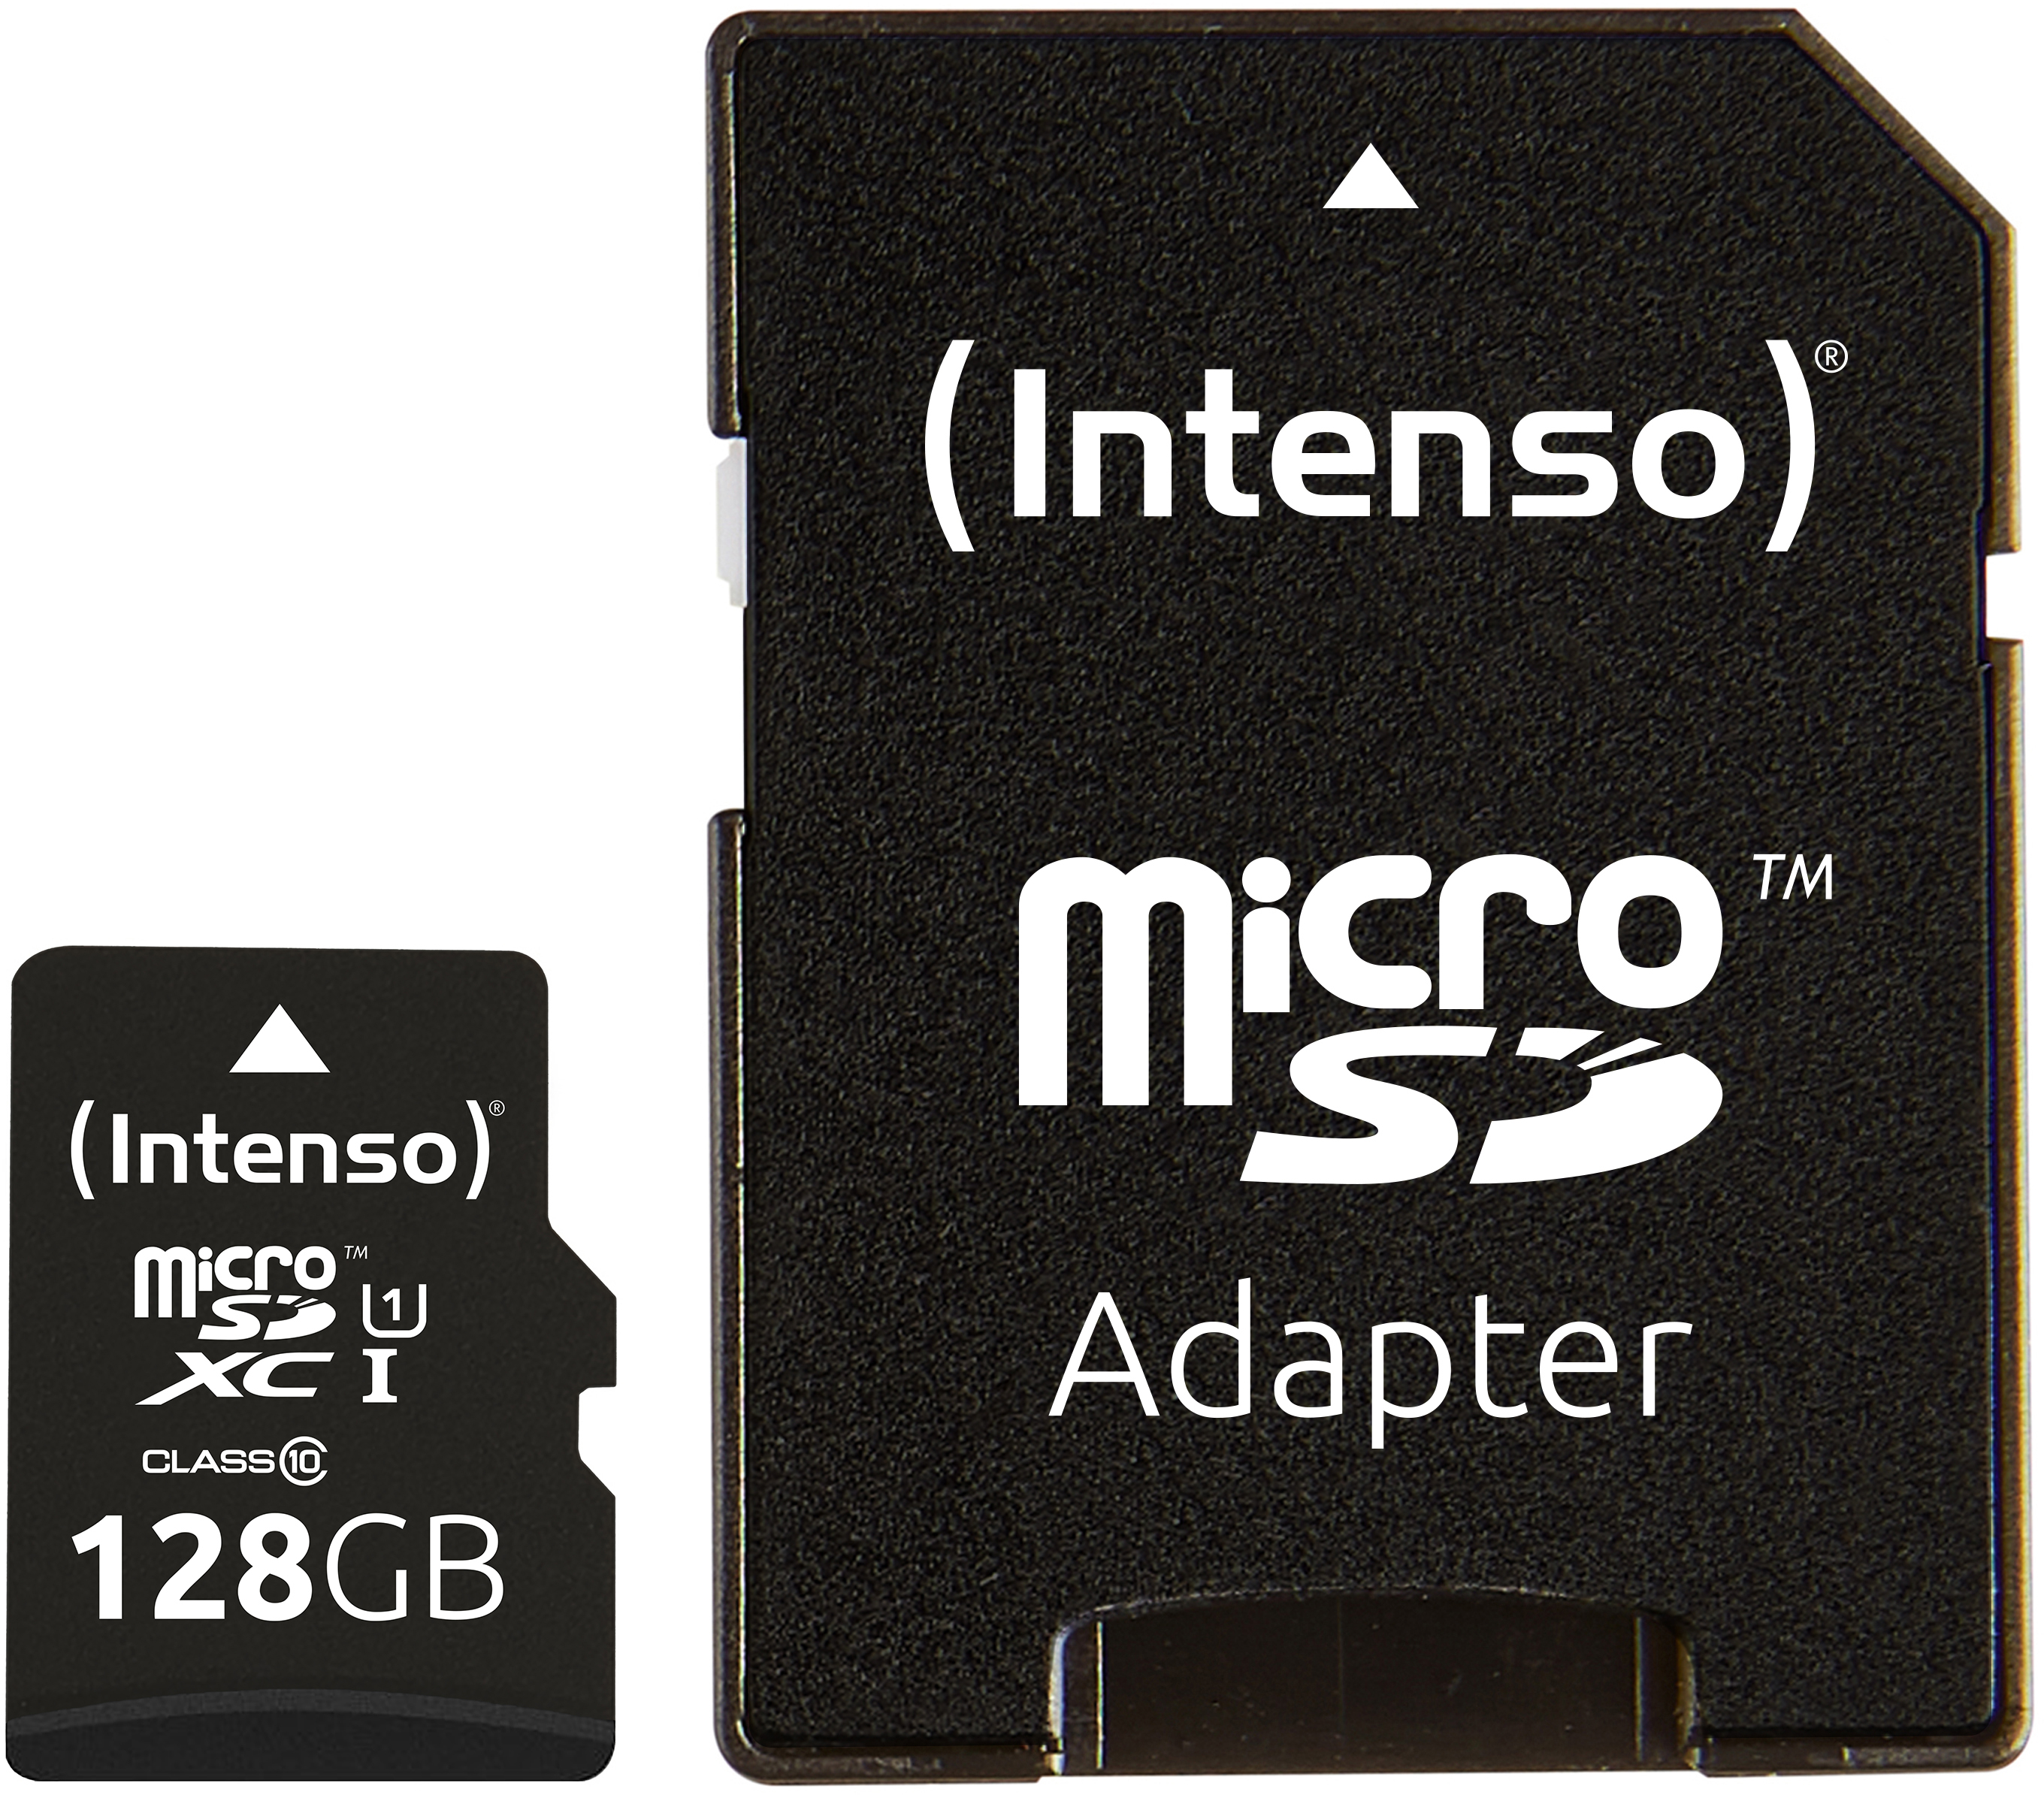 INTENSO Micro SDXC Card PREMIUM 128GB 3423491 with adapter, UHS-I with adapter, UHS-I